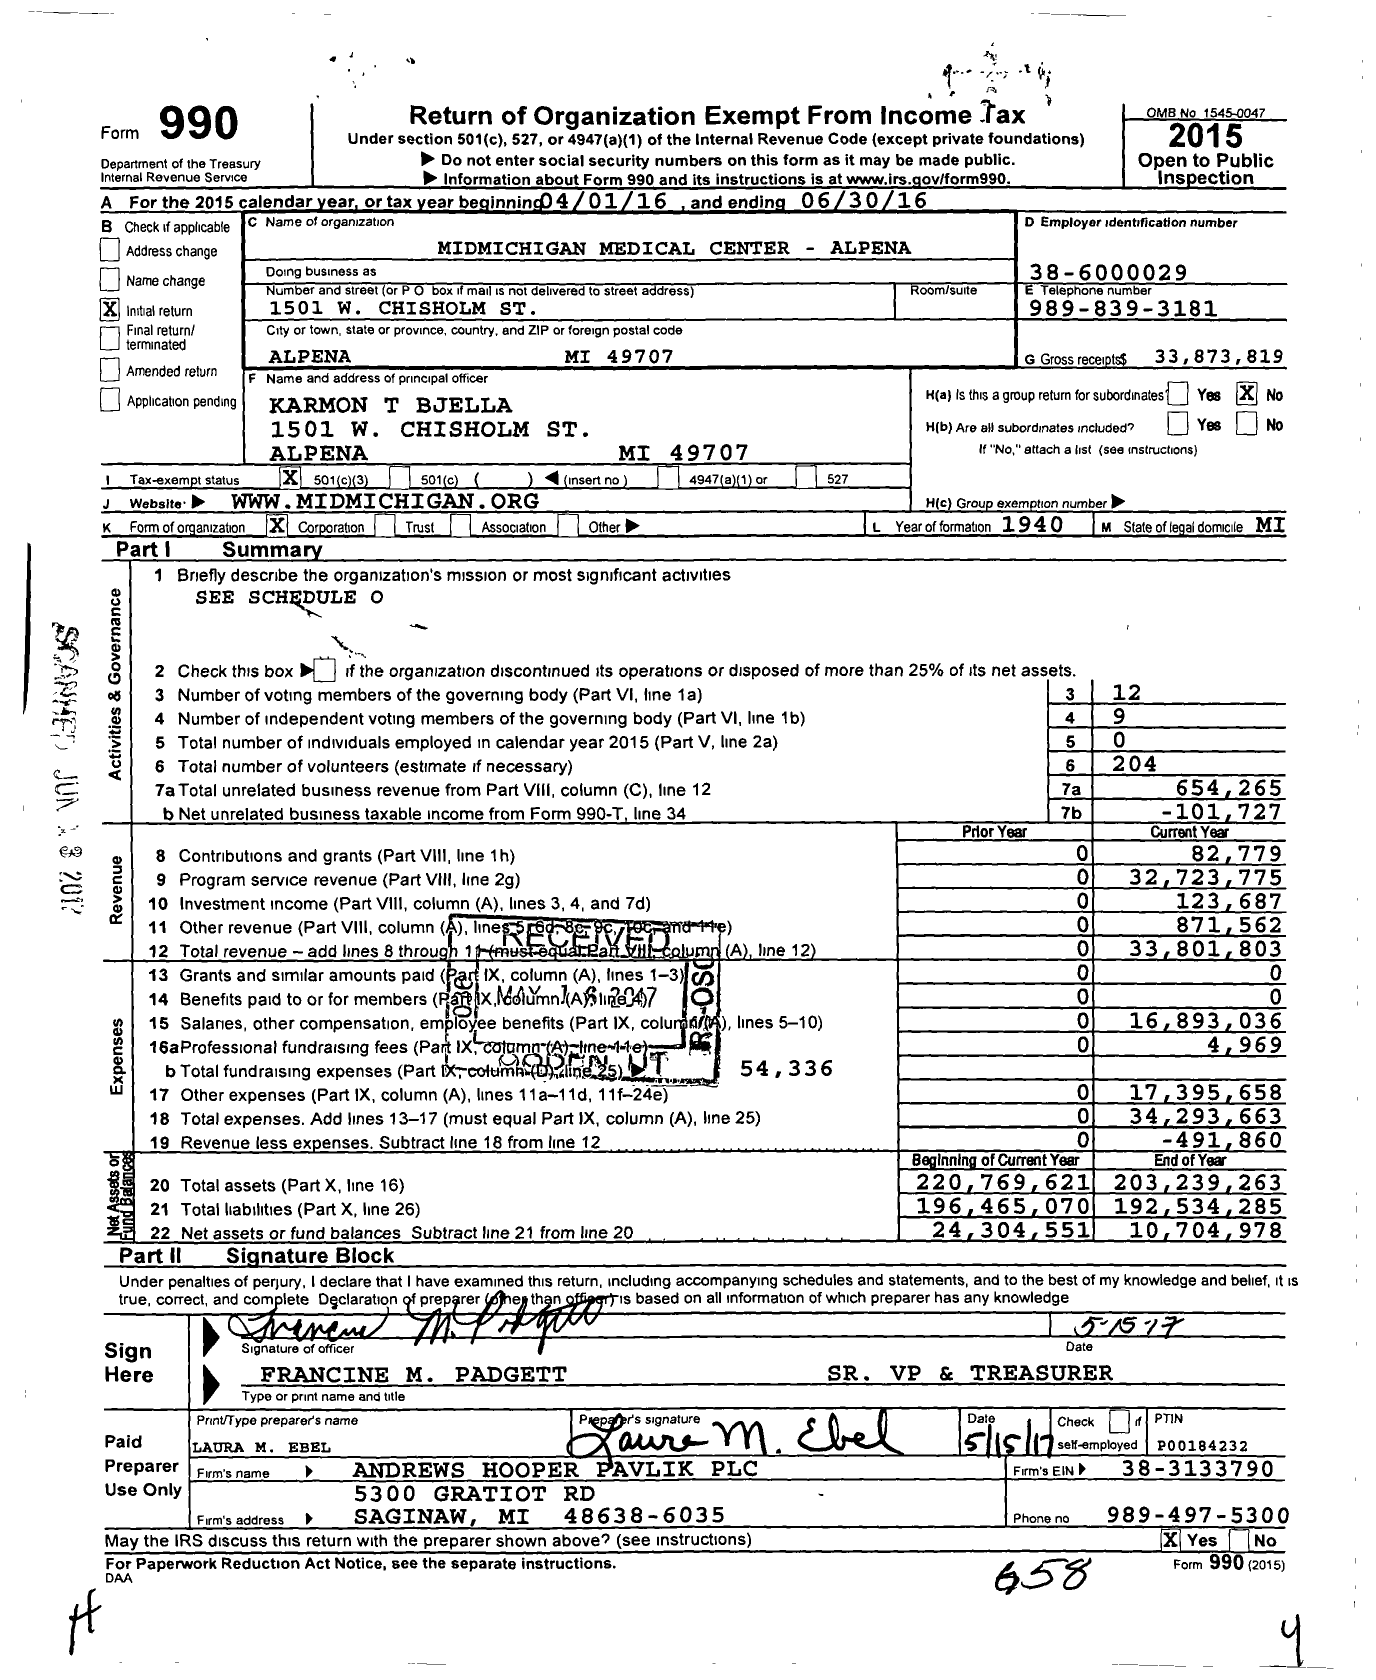 Image of first page of 2015 Form 990 for Mymichigan Medical Center Center-Alpena